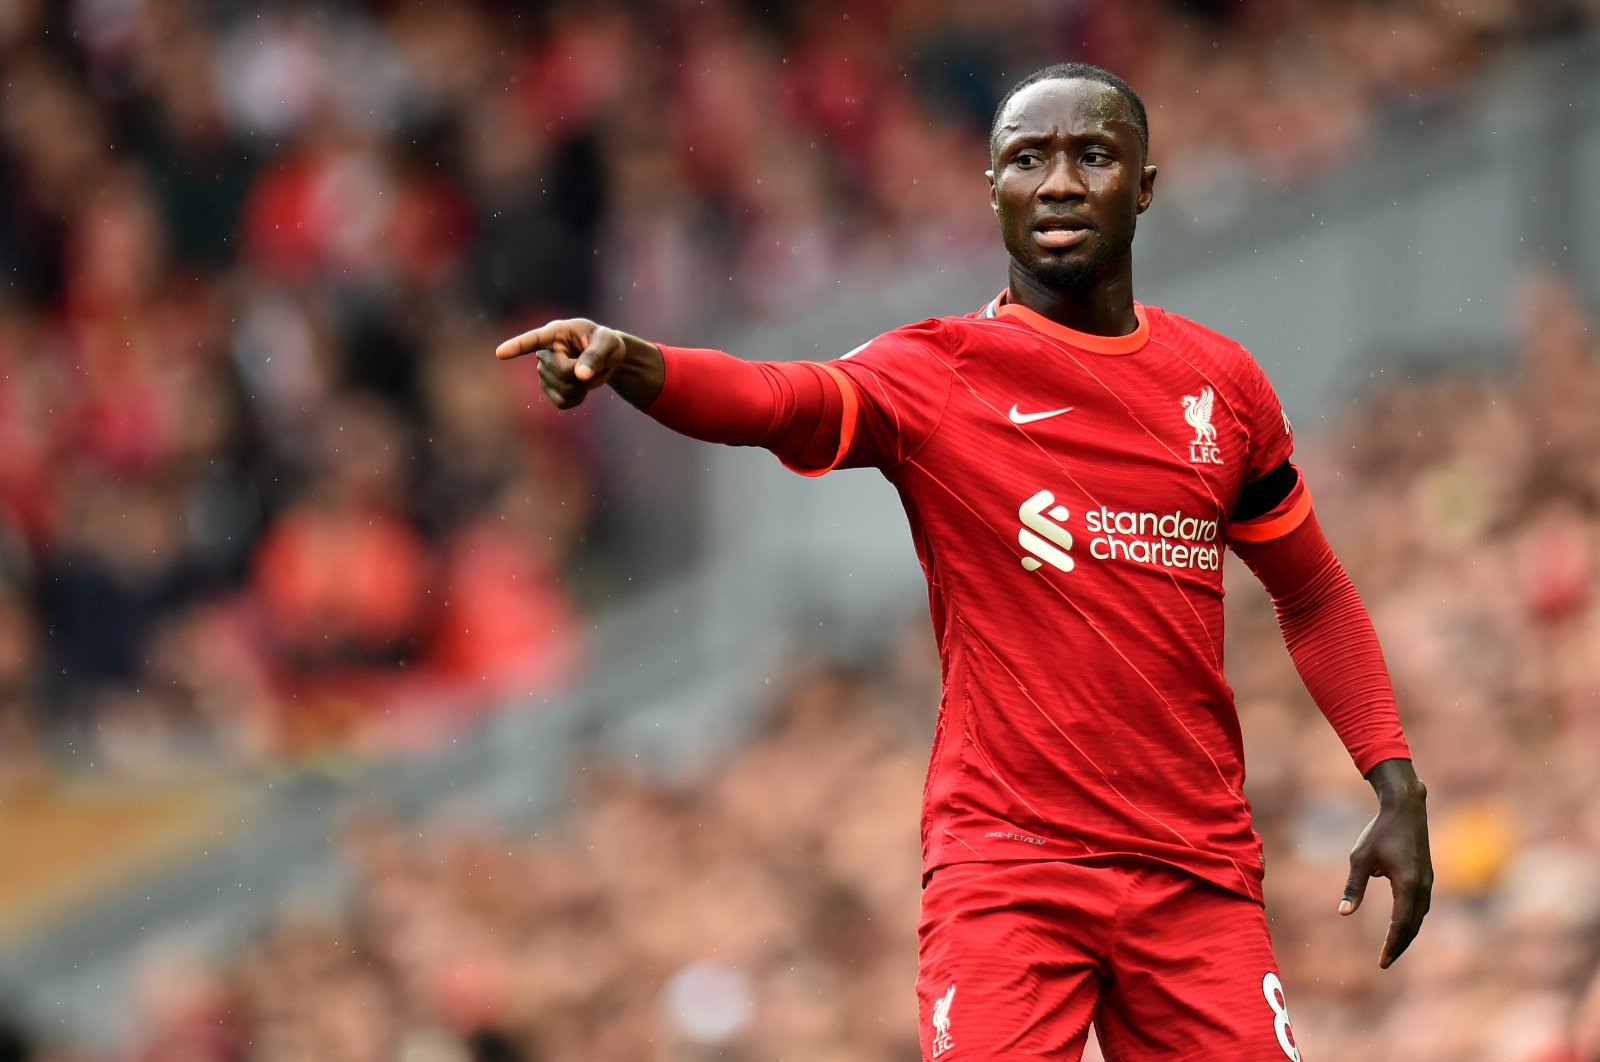 Liverpool's Naby Keita in action during the English Premier League football match between Liverpool FC and Burnley FC at Anfield, Liverpool, Britain, Aug. 21, 2021. (EPA Photo)